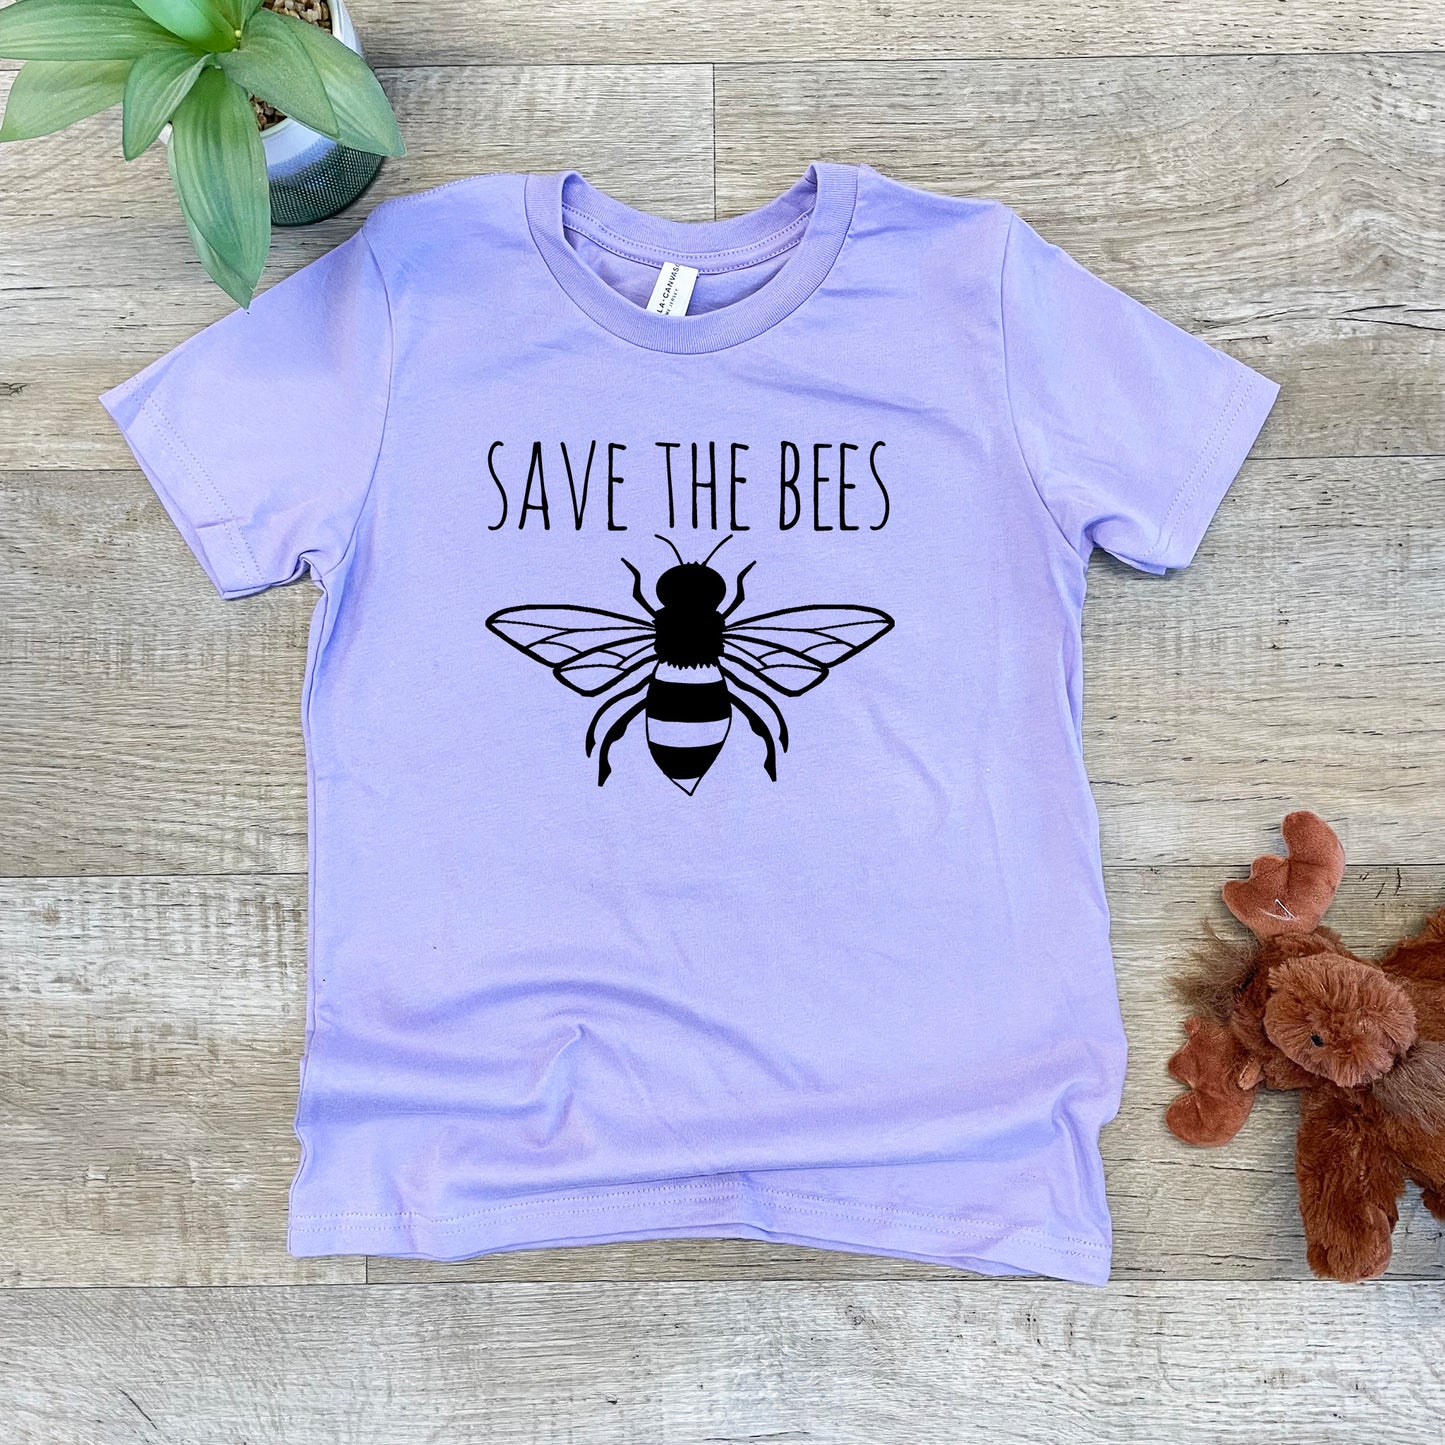 Save The Bees - Kid's Tee - Columbia Blue or Lavender